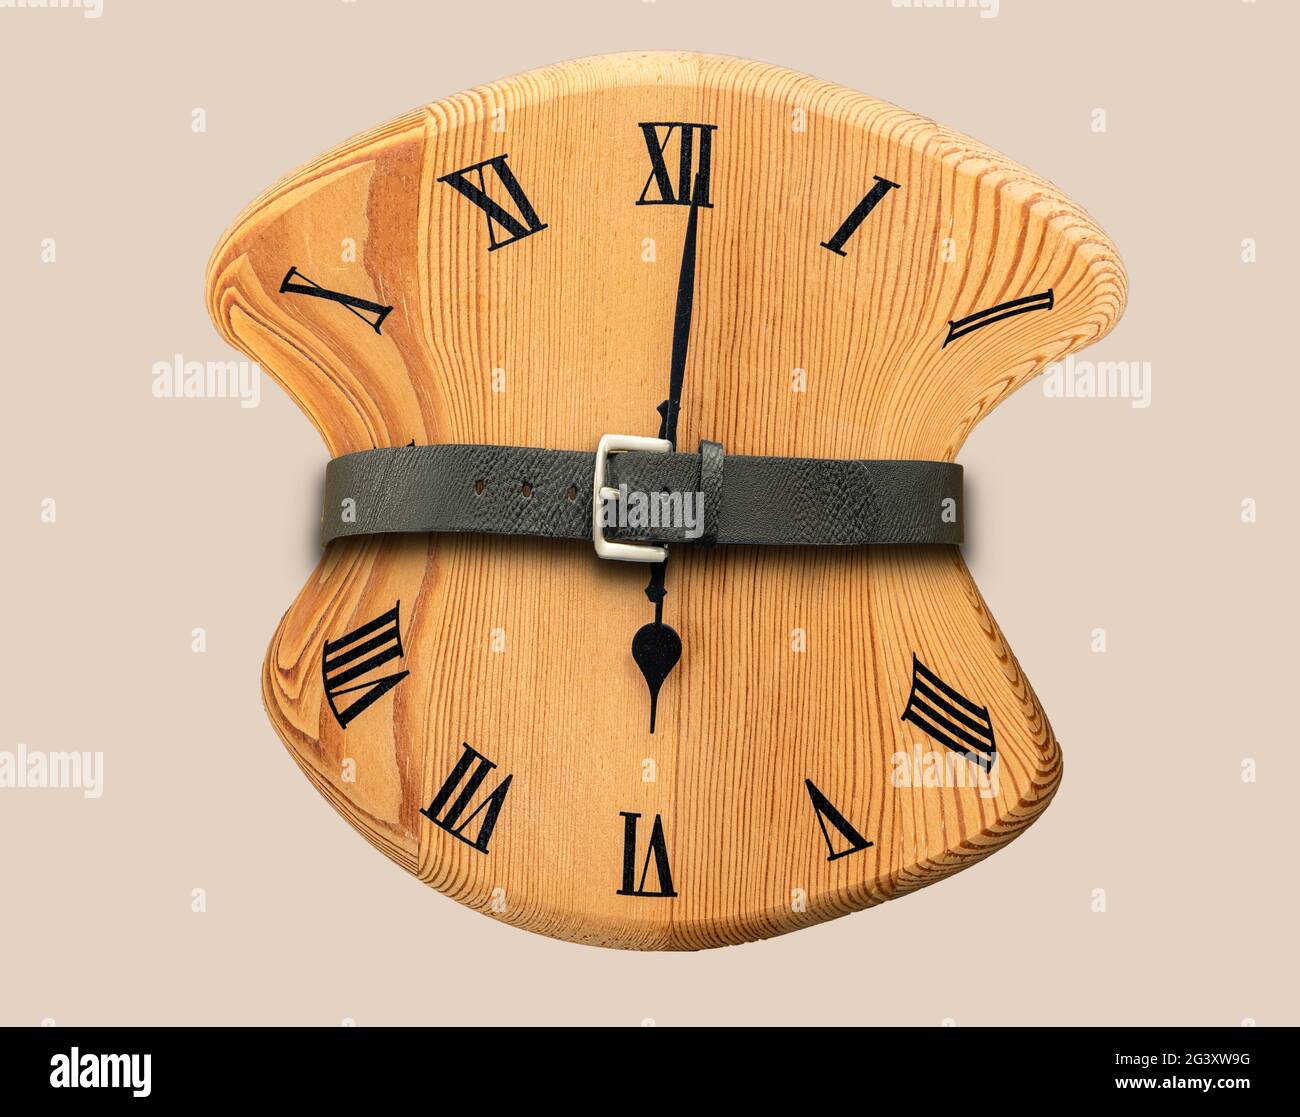 Tight for Time - Distorted Clock with belt pulled tight Stock Photo